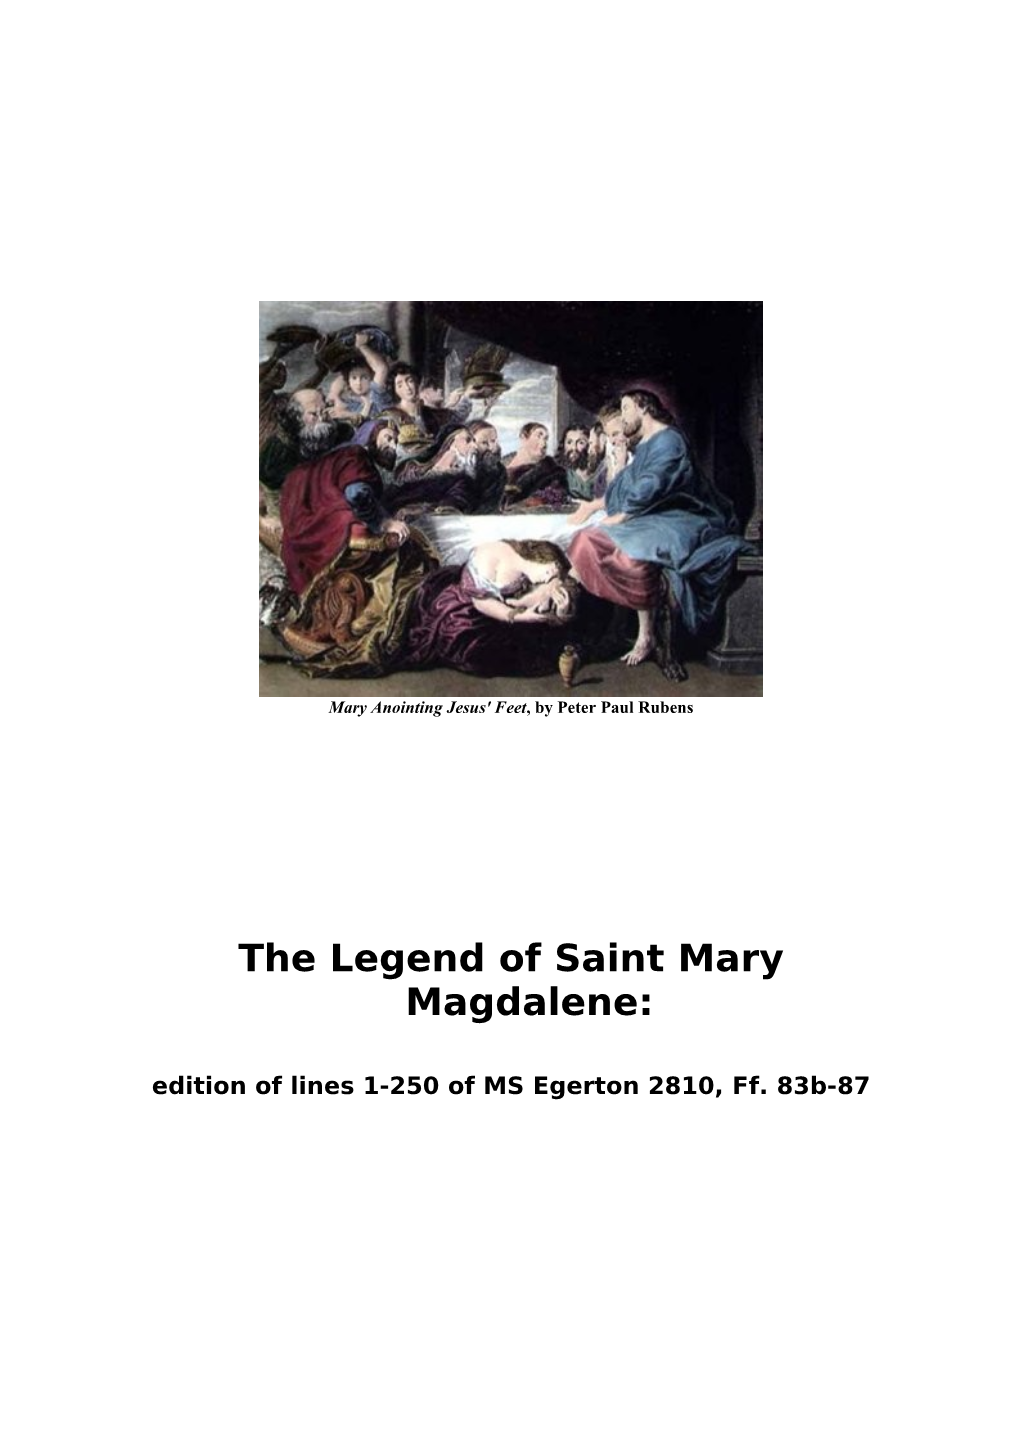 The Legend of Saint Mary Magdalene: Edition of Lines 1-250 of MS Egerton 2810, Ff